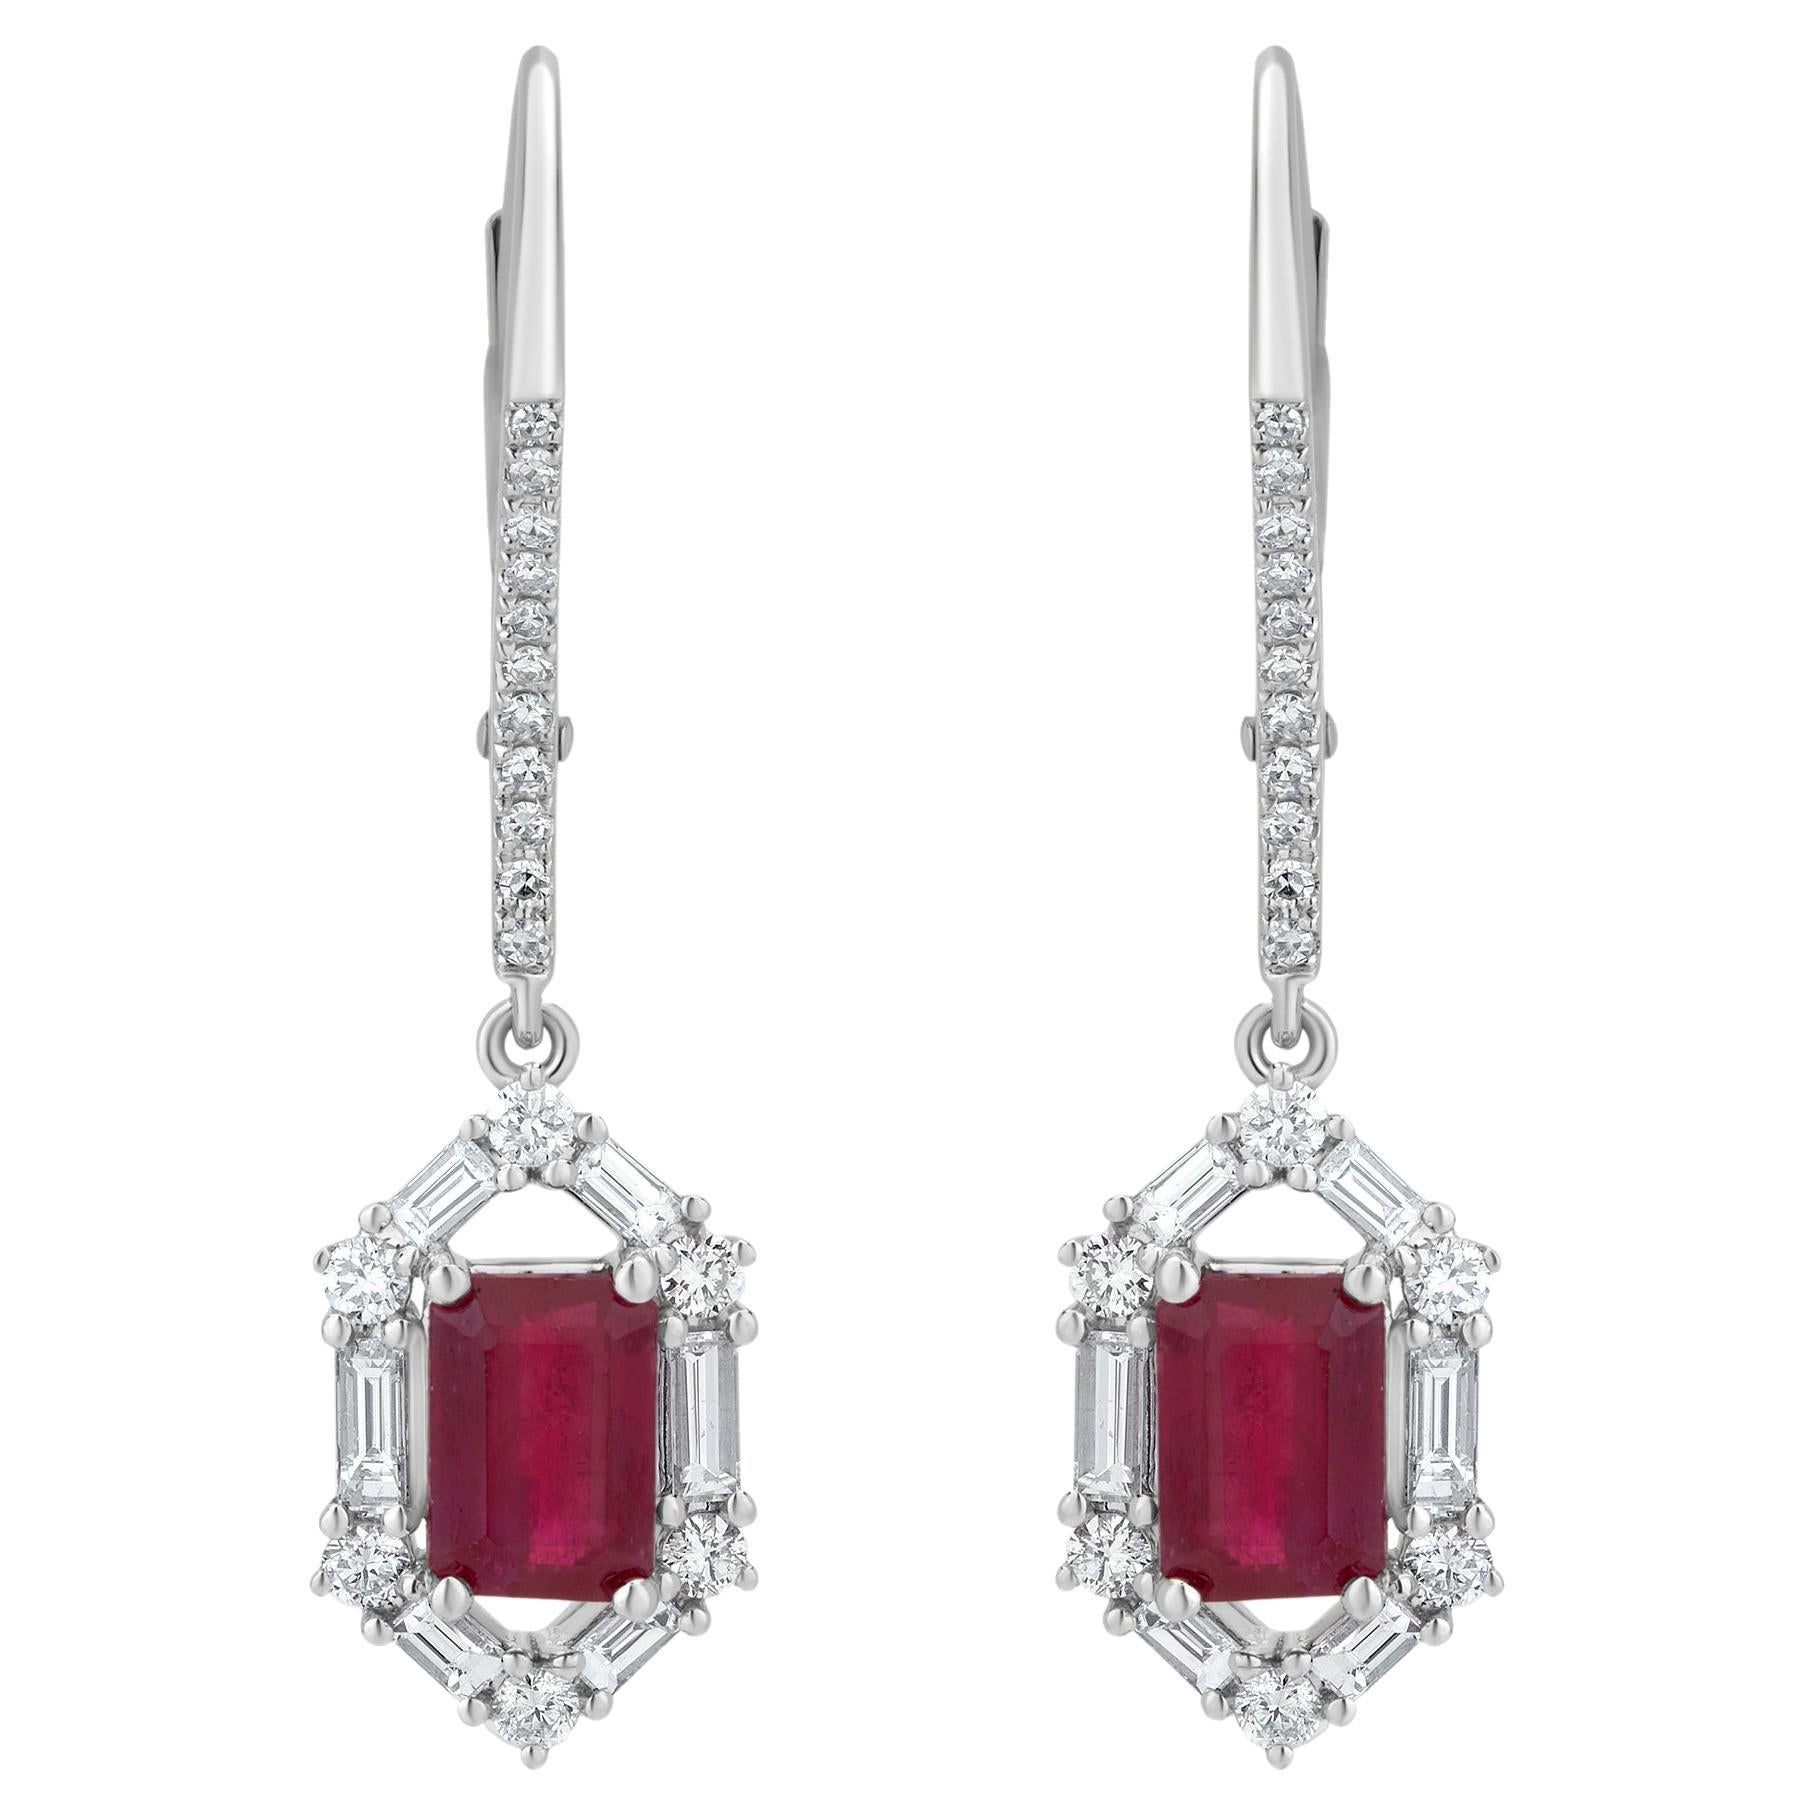 Gemistry 2.11 Cttw. Octagon Ruby and Diamond Drop Earrings in 18k White Gold